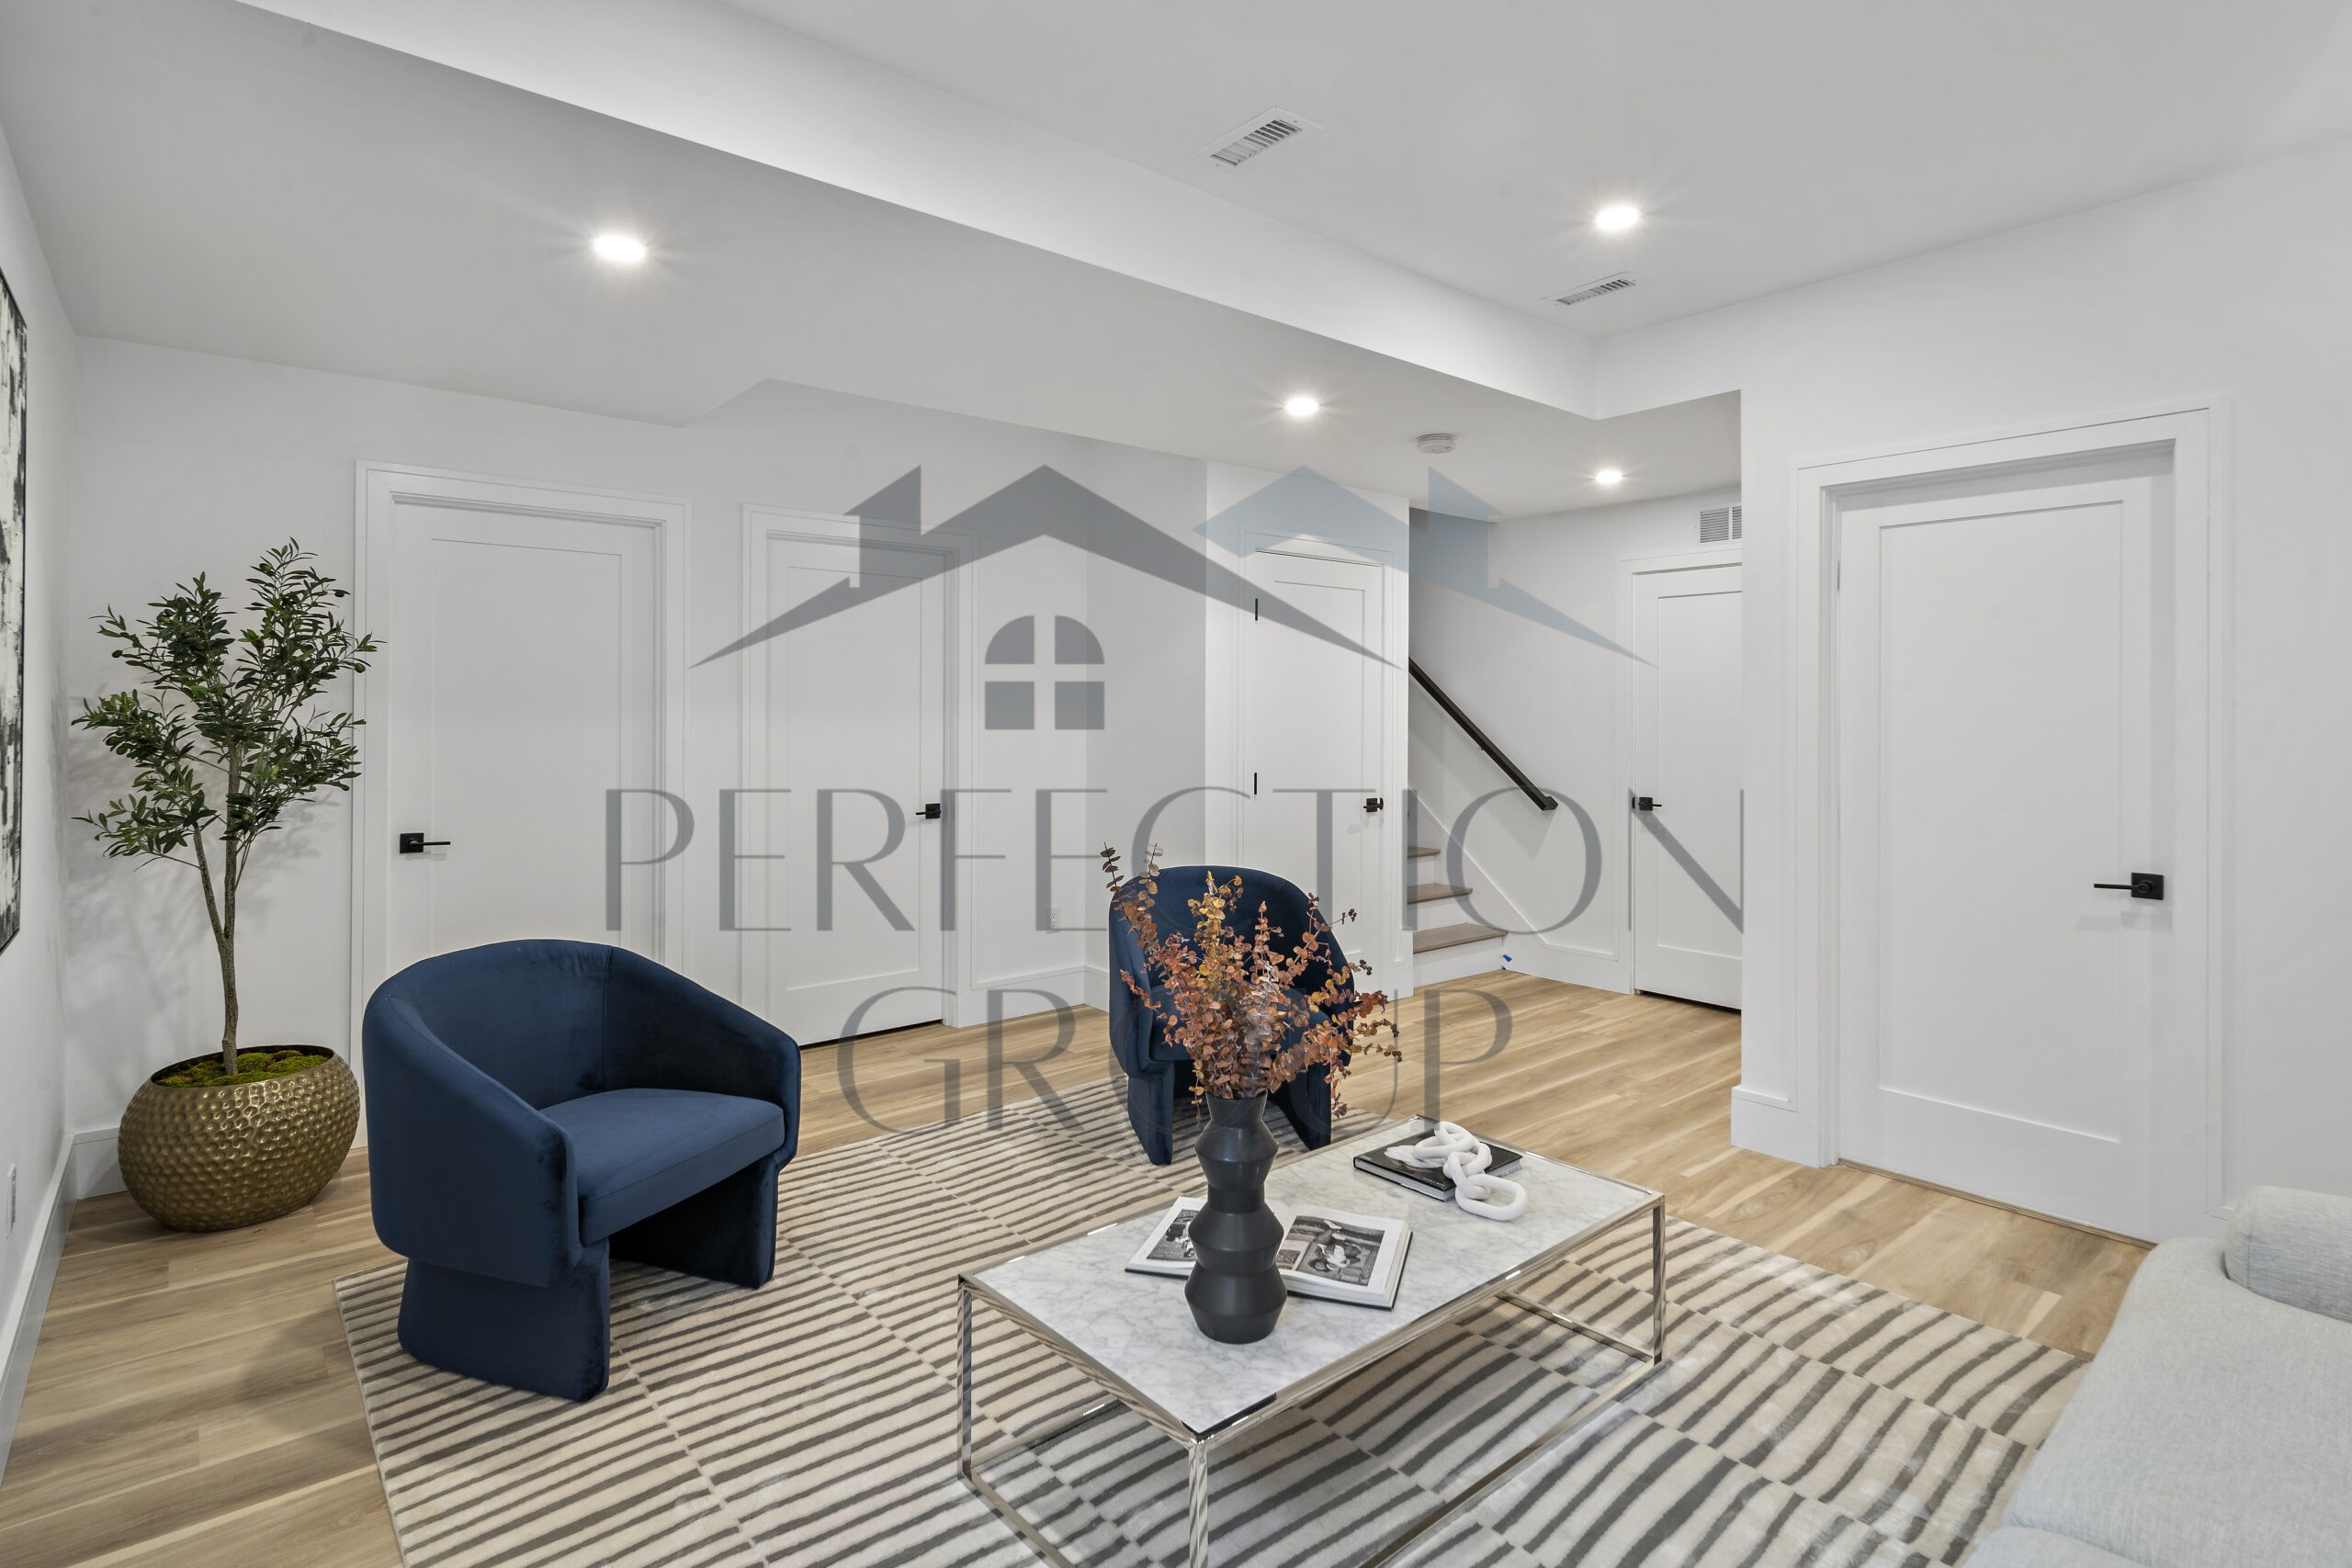 Basement conversion to legal basement as per Ontario Building code by Perfection Group